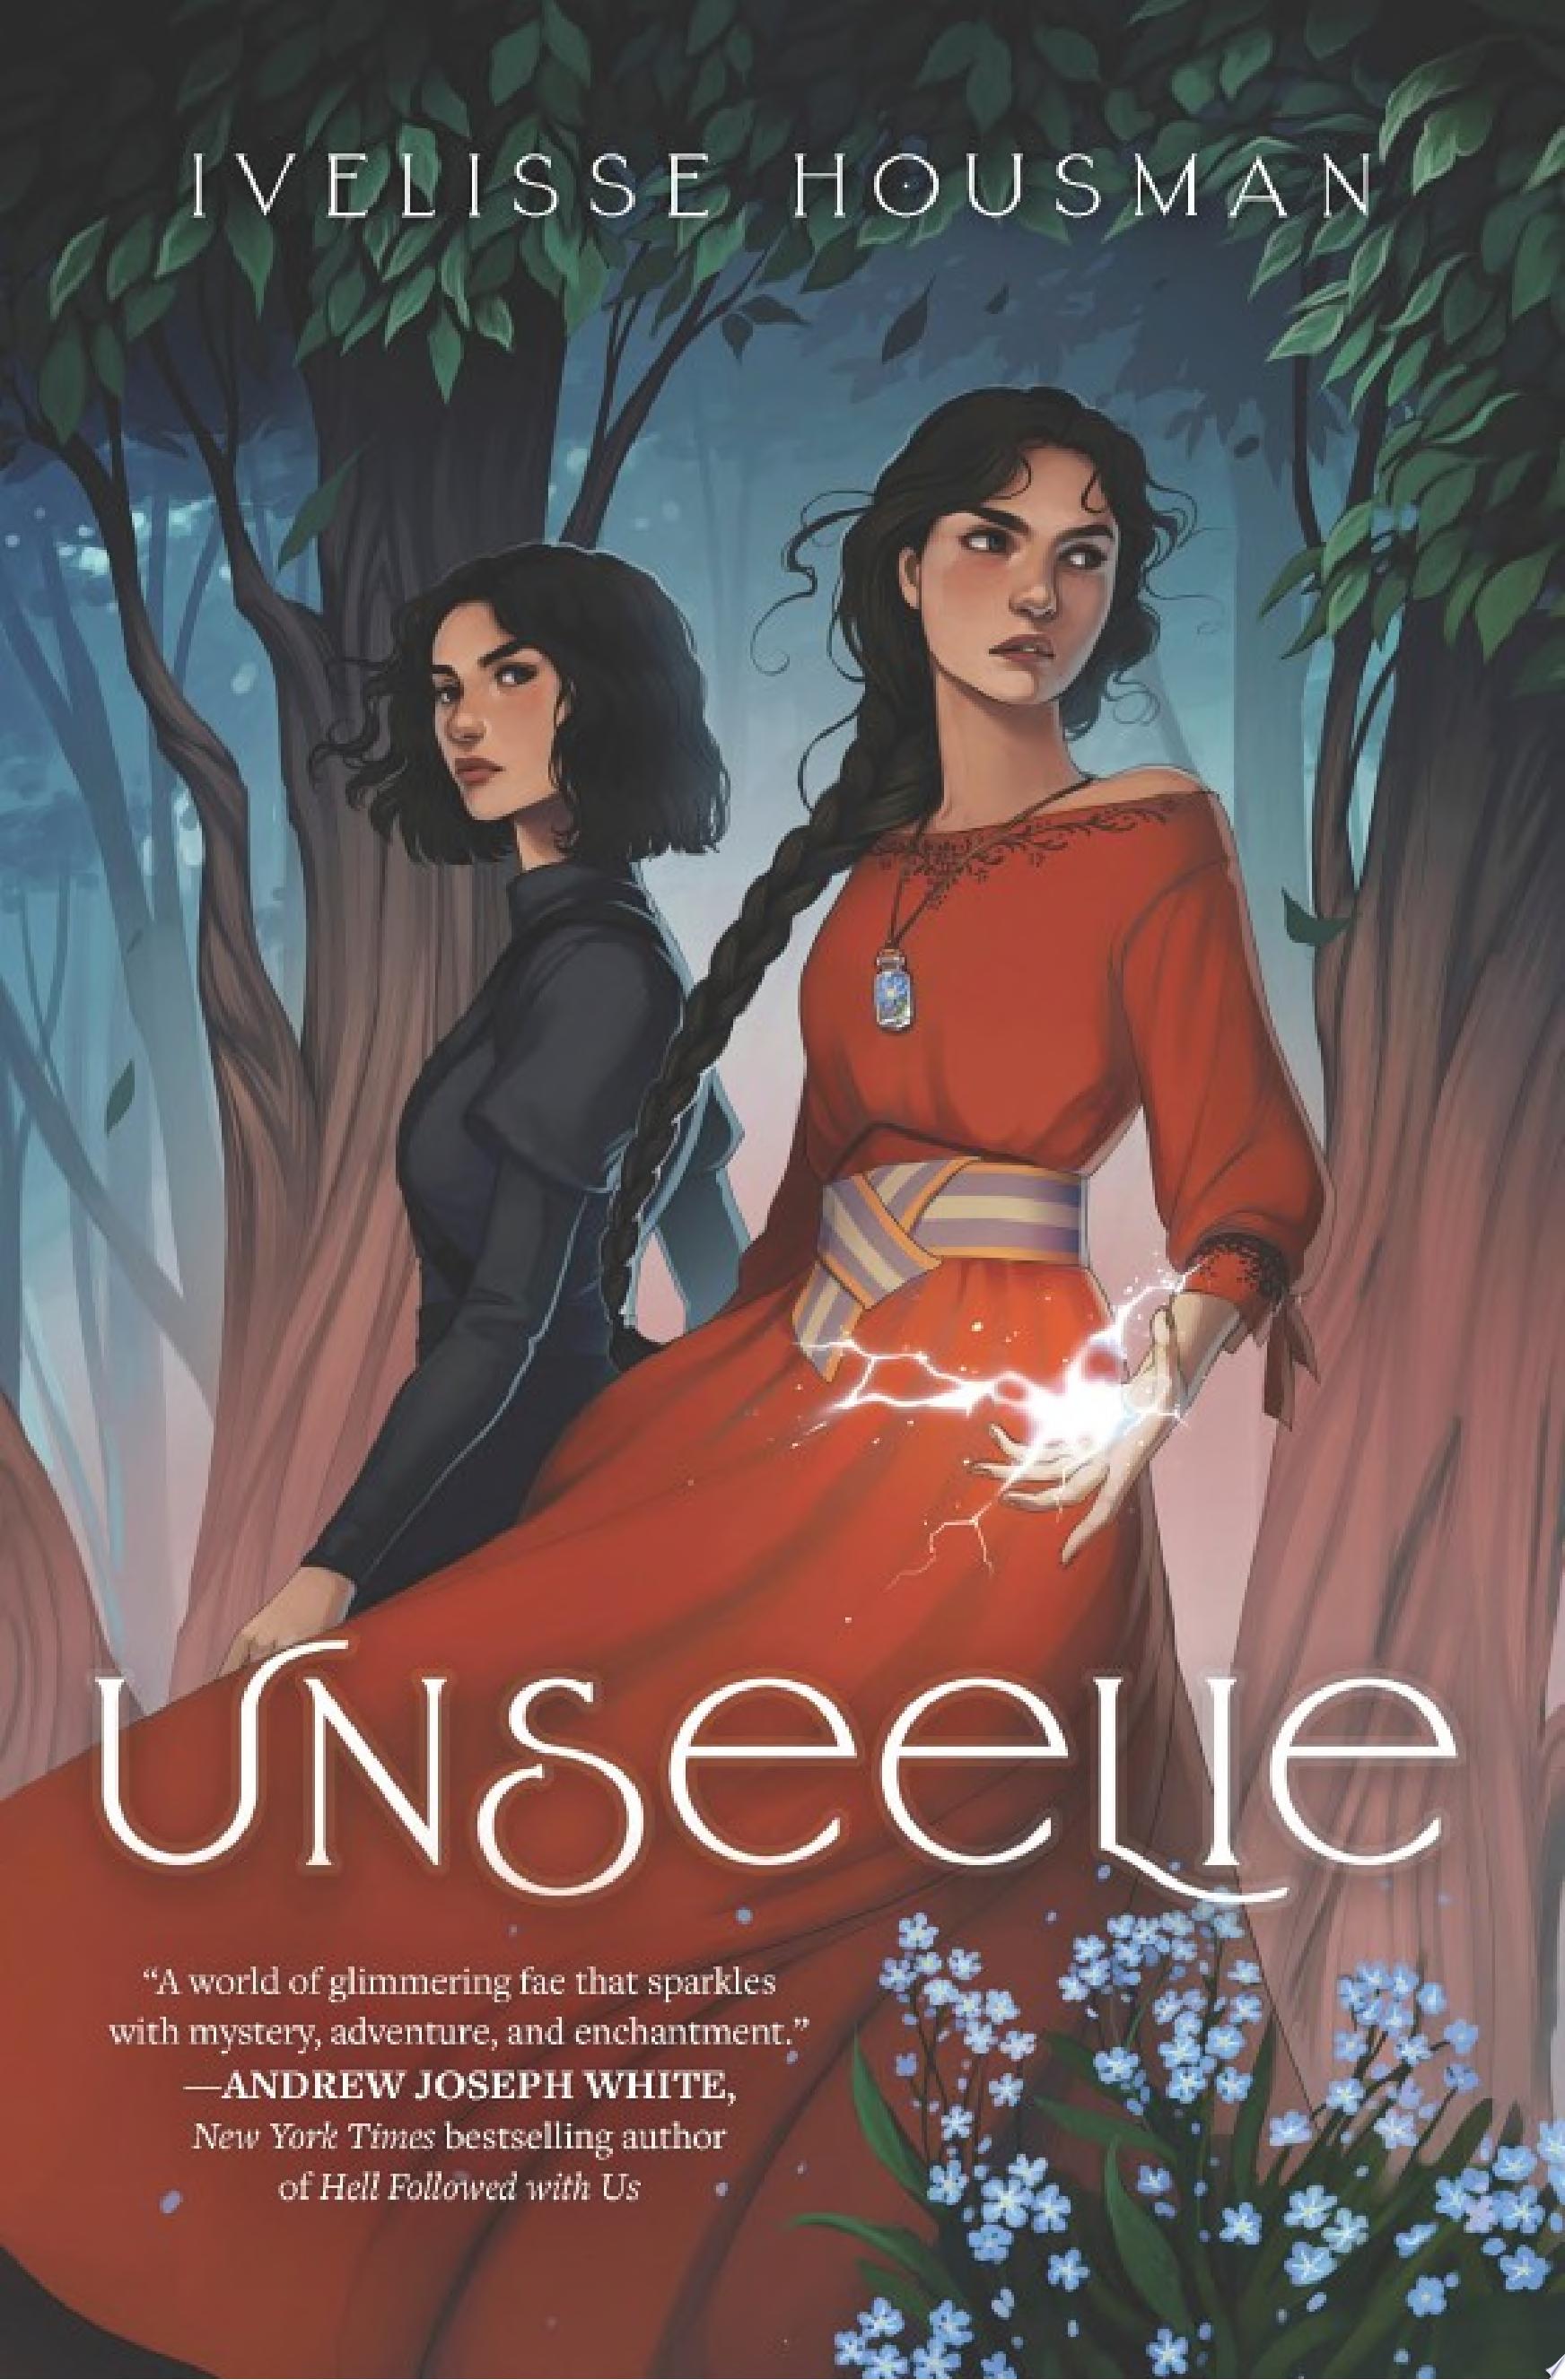 Image for "Unseelie"